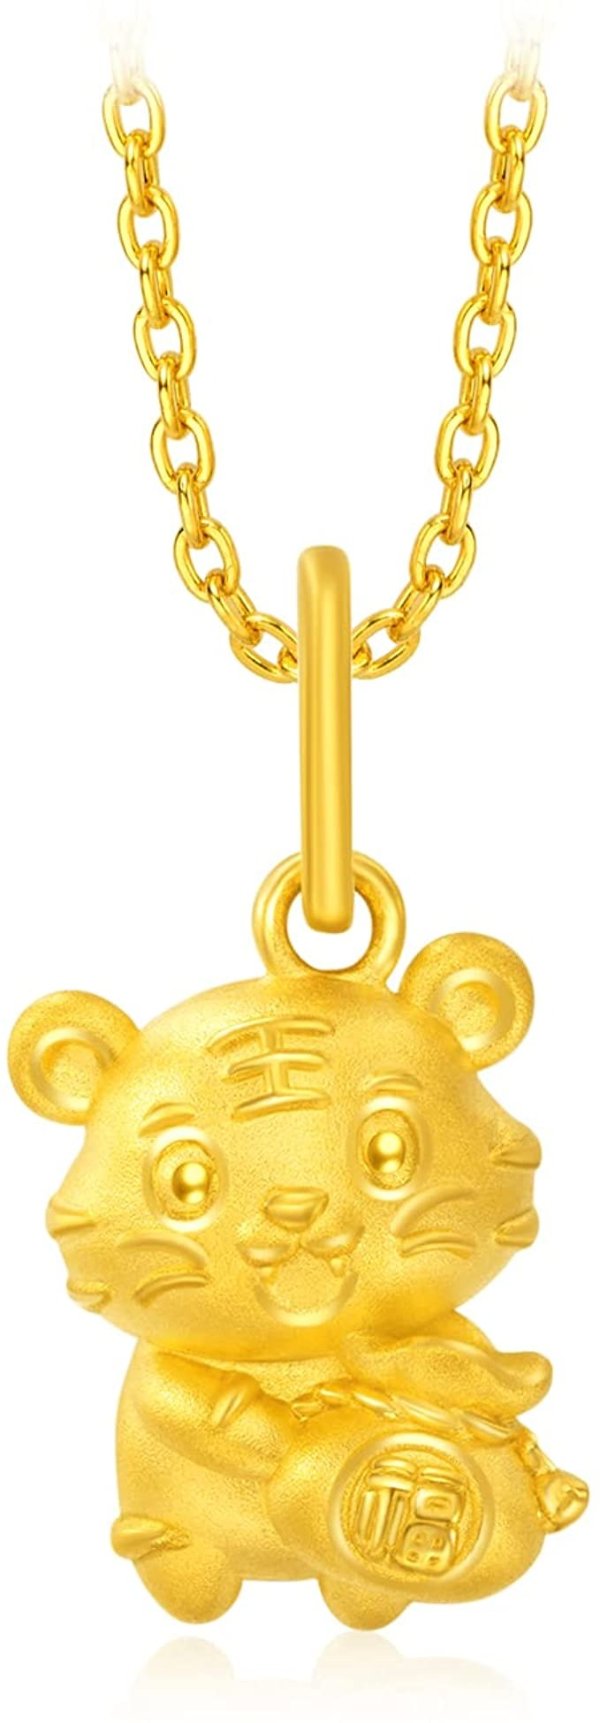 999 Pure 24K Gold Year of Tiger Welcome Happiness Pendant